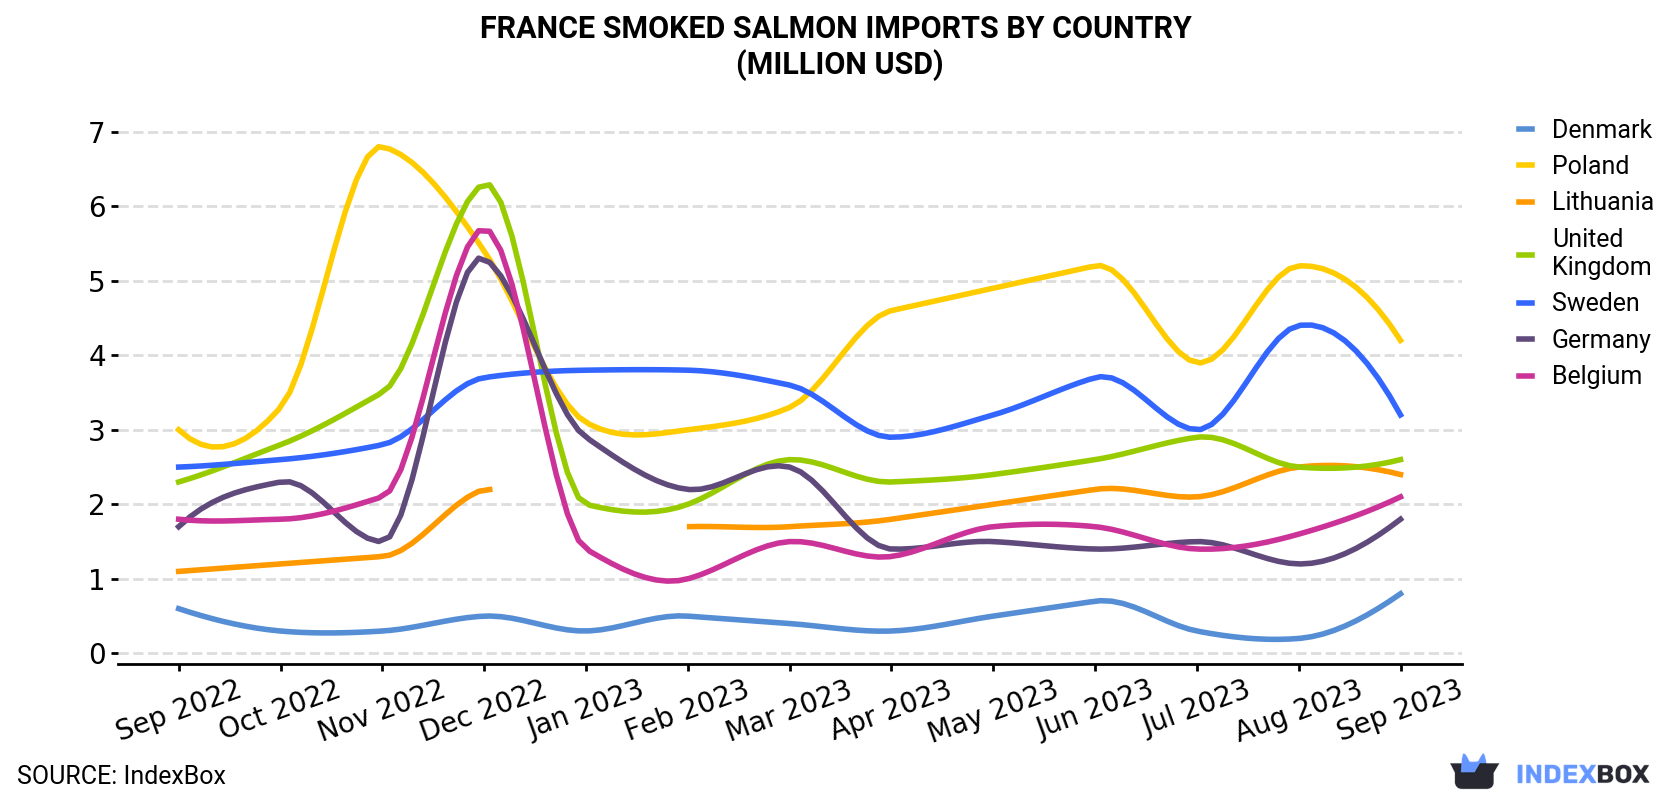 France Smoked Salmon Imports By Country (Million USD)